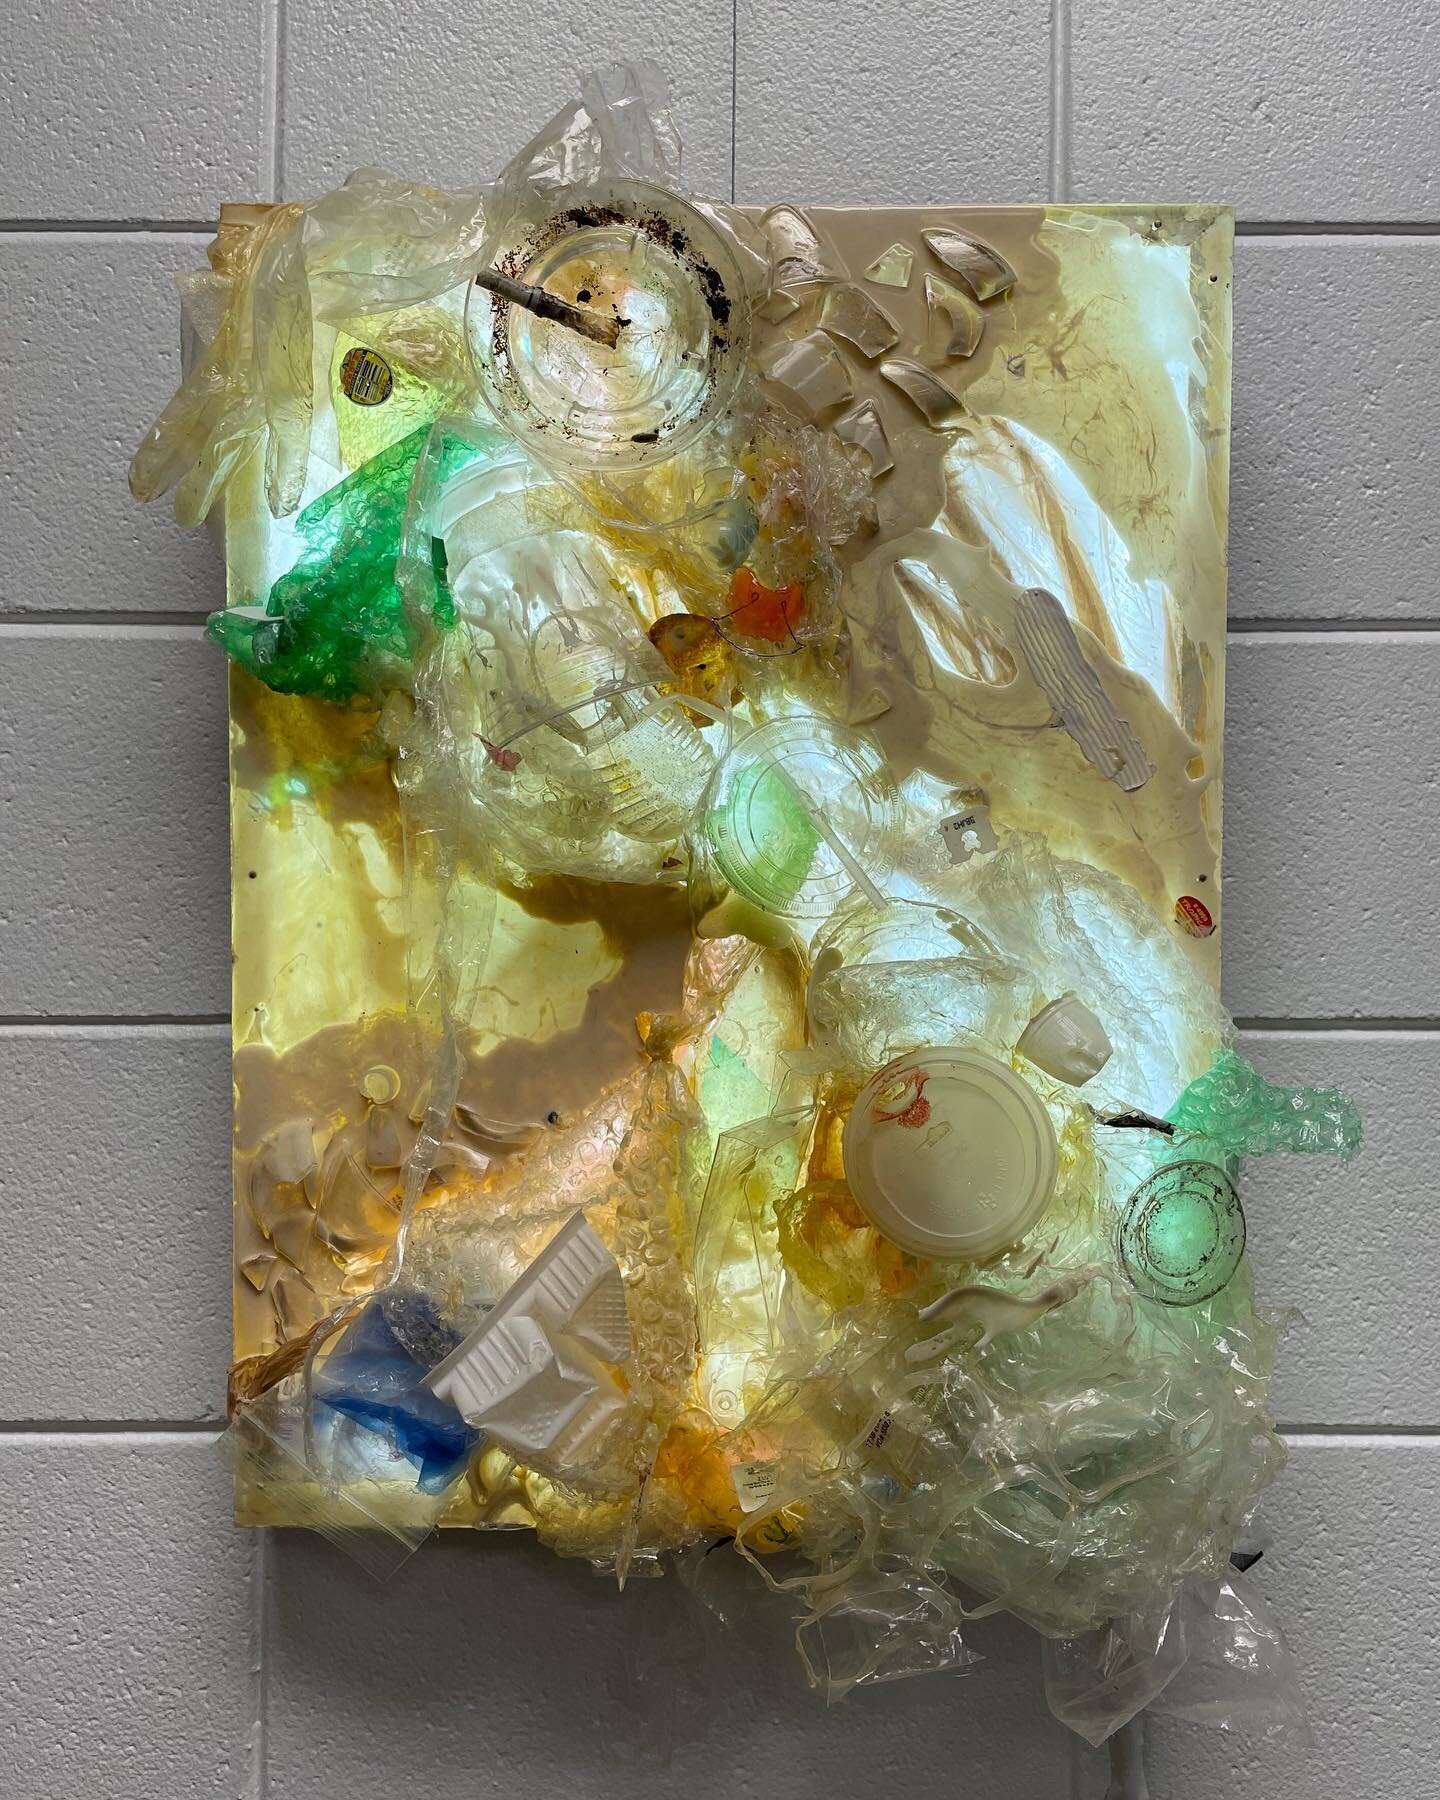 &ldquo;Glorified Garbage&rdquo; I started this piece in 2016 after teaching abroad in France for one school year. It took me two years to finish it and I guess 5 years to finally exhibit it. If you get the chance stop by my show at USF, which is rife